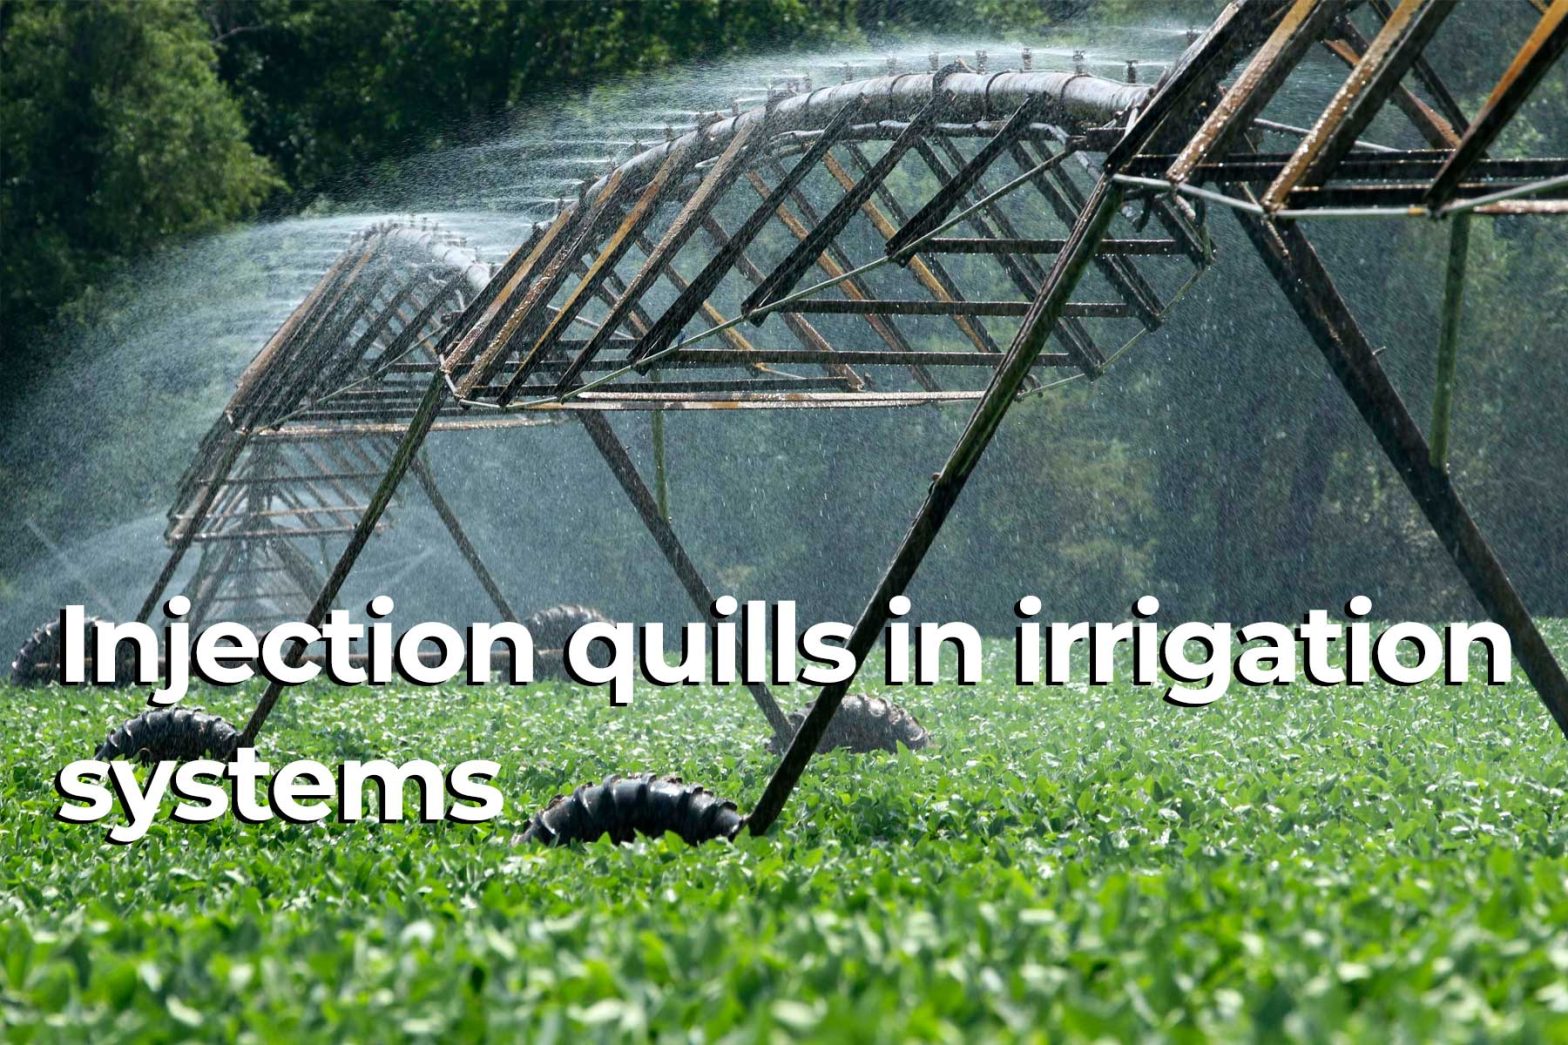 How injection quills from India ensure accurate dosing of chemicals in irrigation systems.